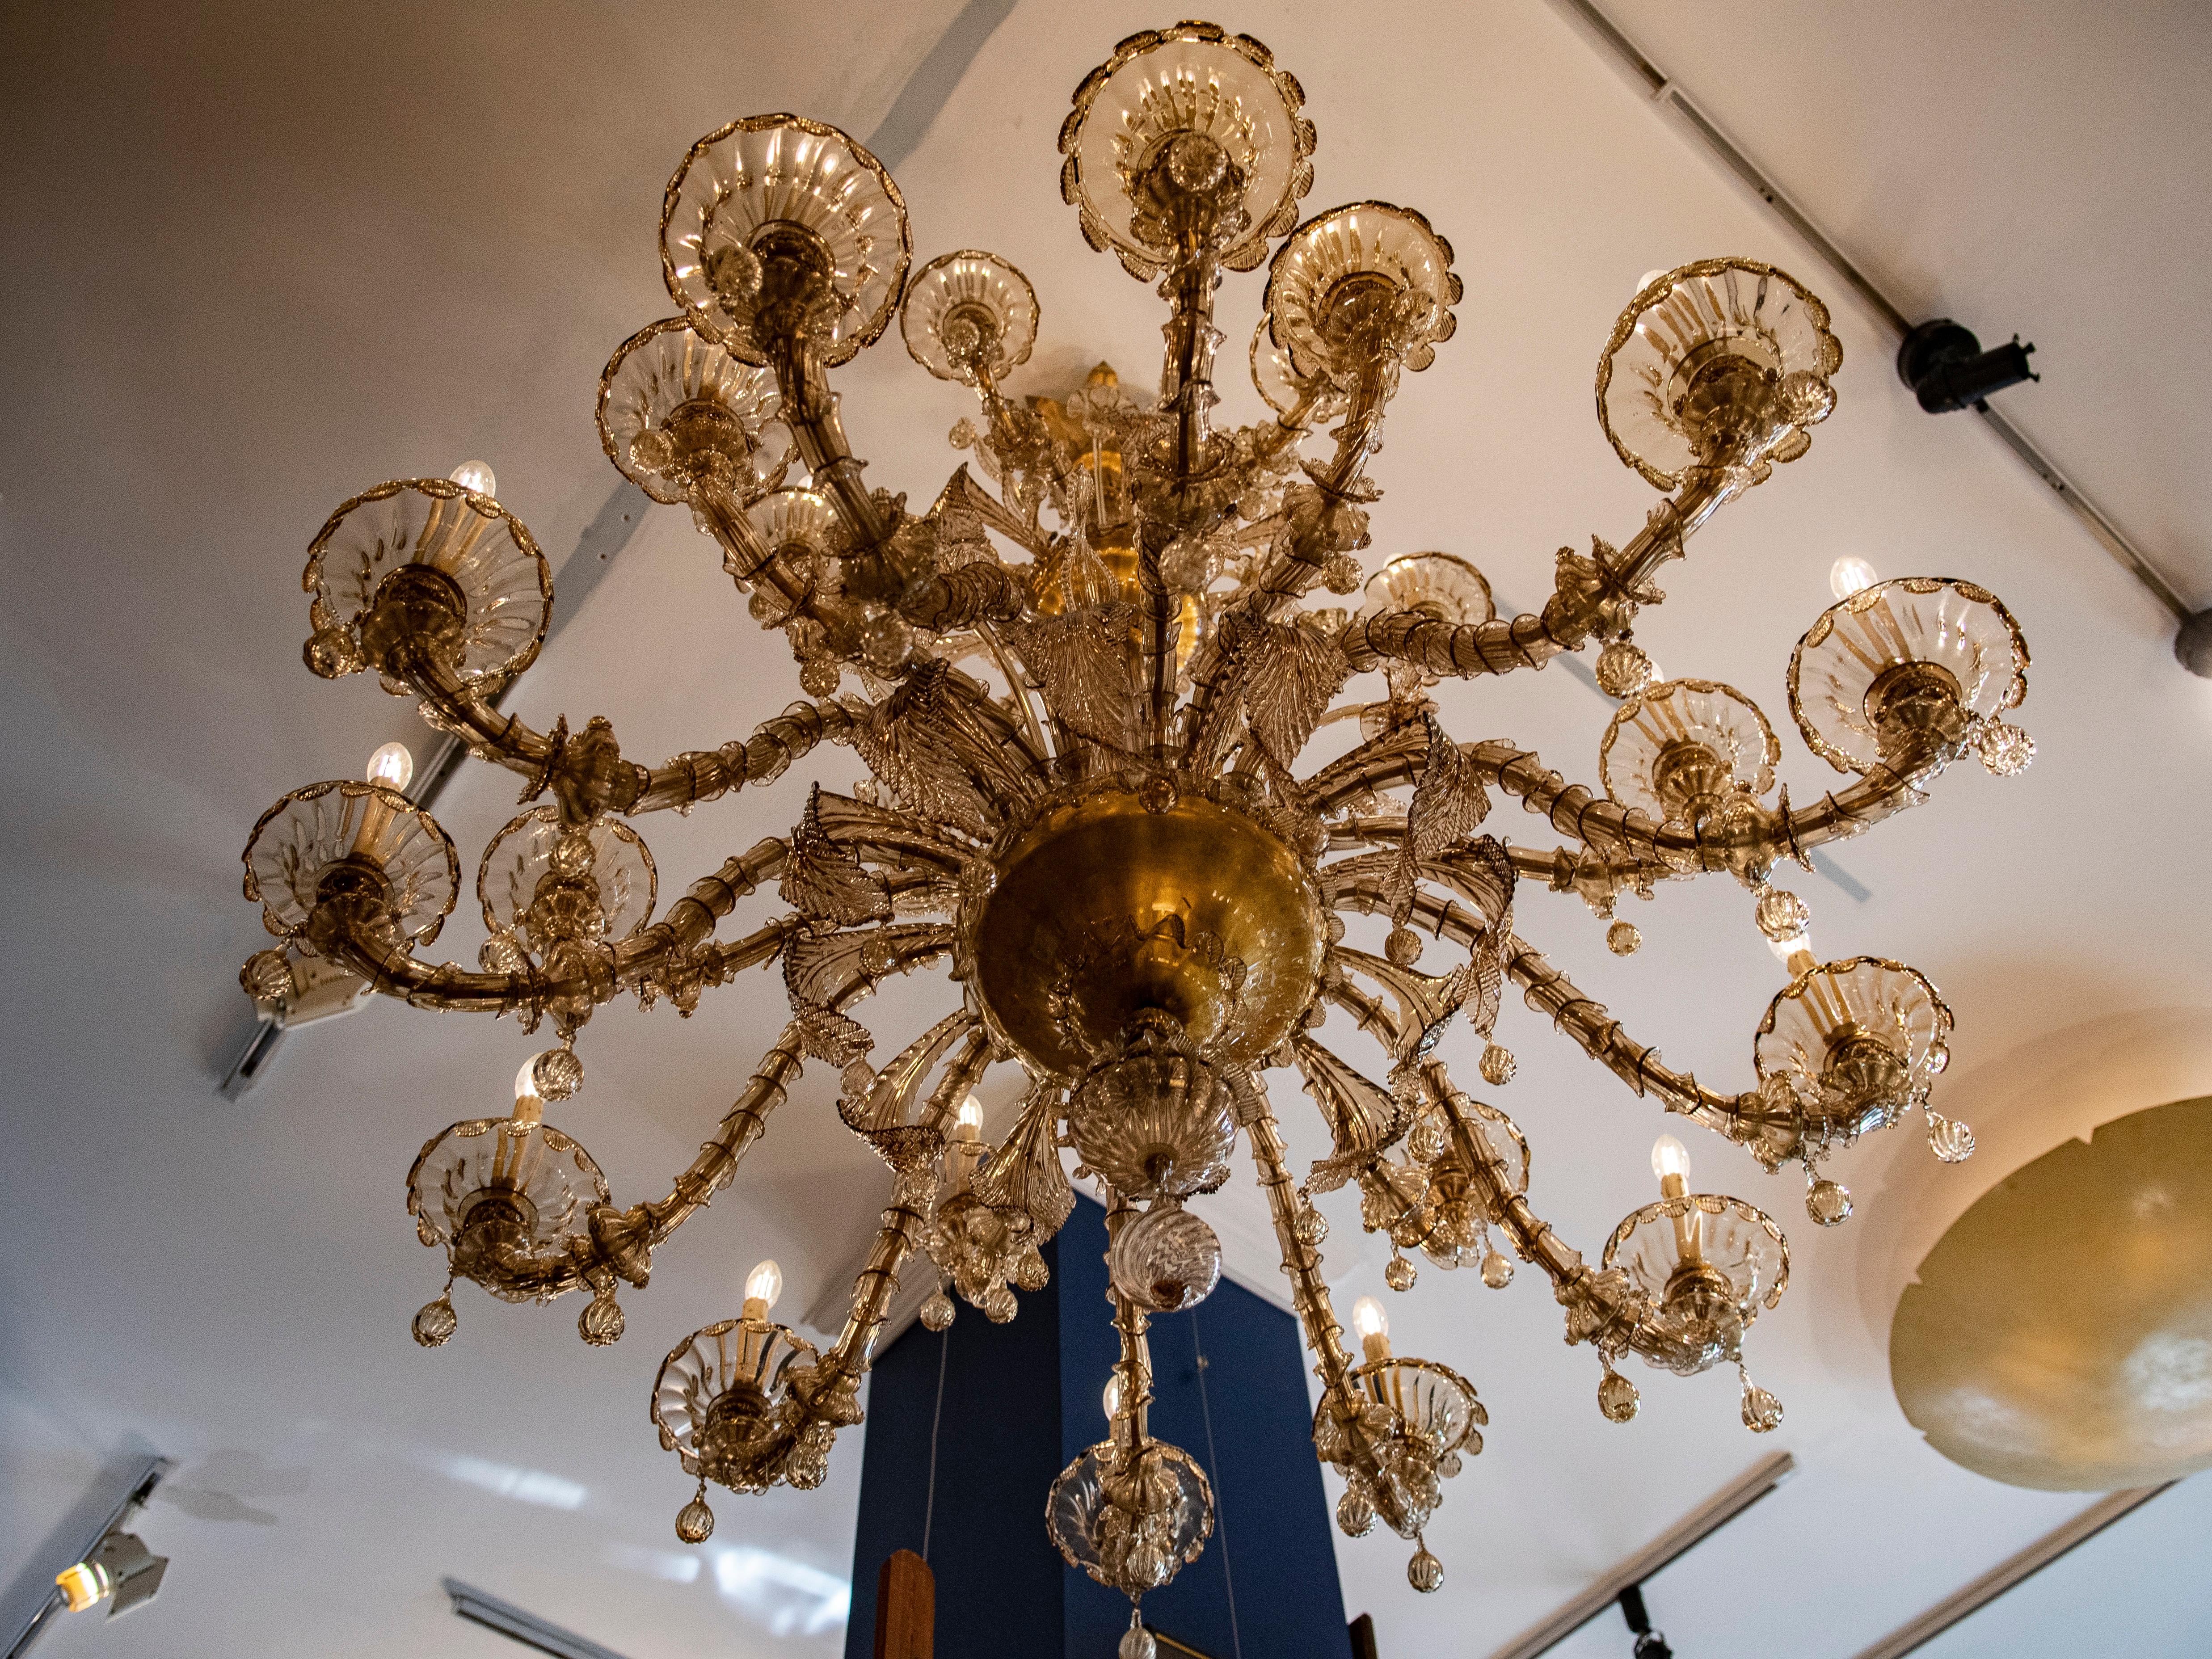 
Step into a realm of timeless elegance with this rare smoked glass handblown Murano chandelier, a stunning testament to the craftsmanship and artistry of Italian glassmaking. Dating back to circa 1940, this exquisite piece features 24 electrified